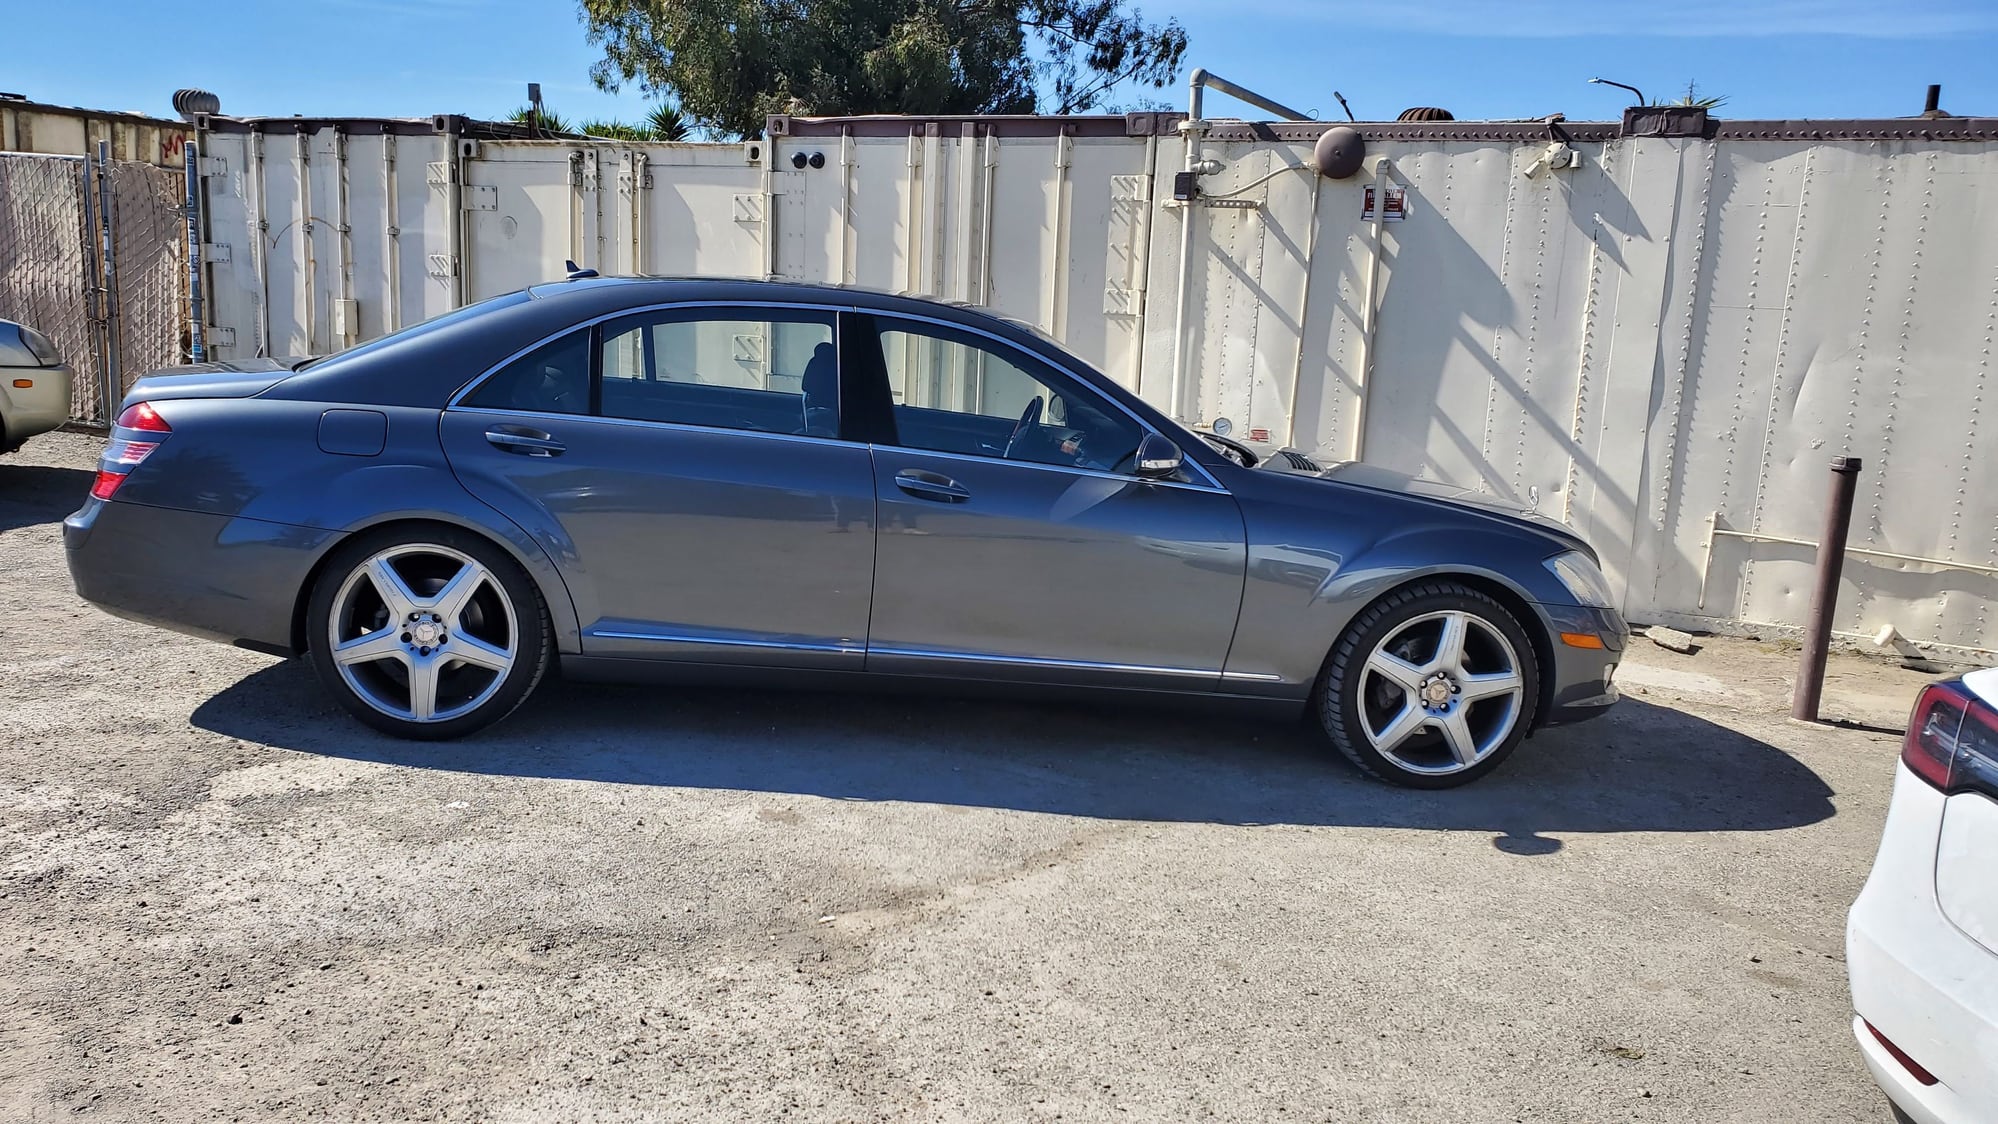 Wheels and Tires/Axles - AMG III V221 S63 Wheels - Used - 2007 to 2013 Mercedes-Benz S63 AMG - Emeryville, CA 94608, United States